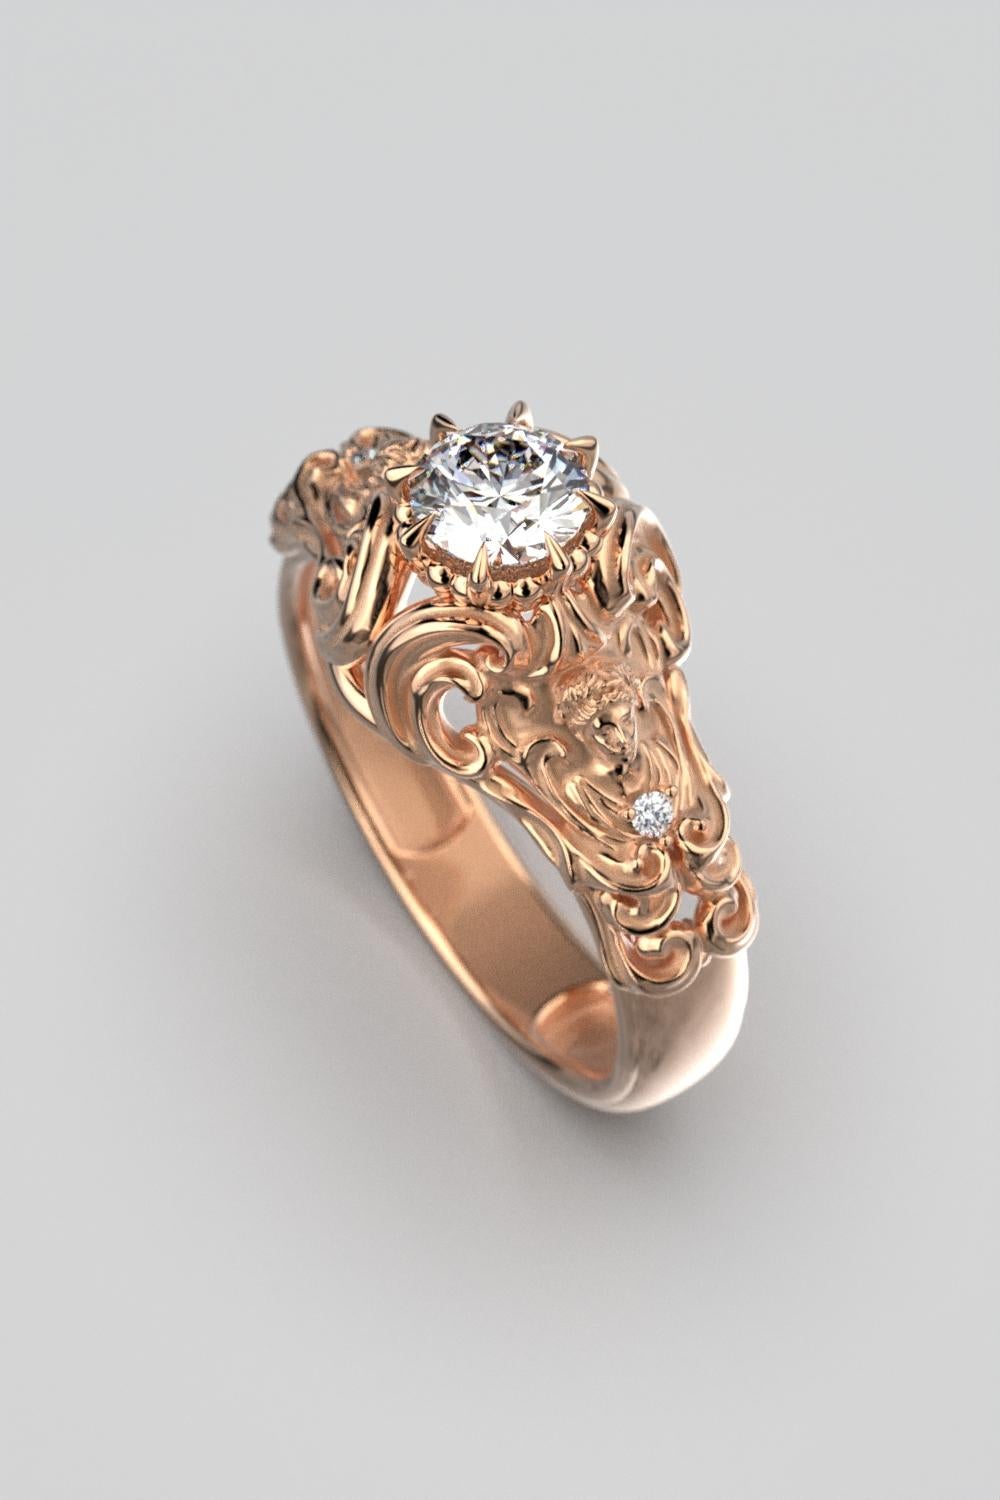 For Sale:  14k Gold Diamond Ring by Oltremare Gioielli in Italian Renaissance Style 8